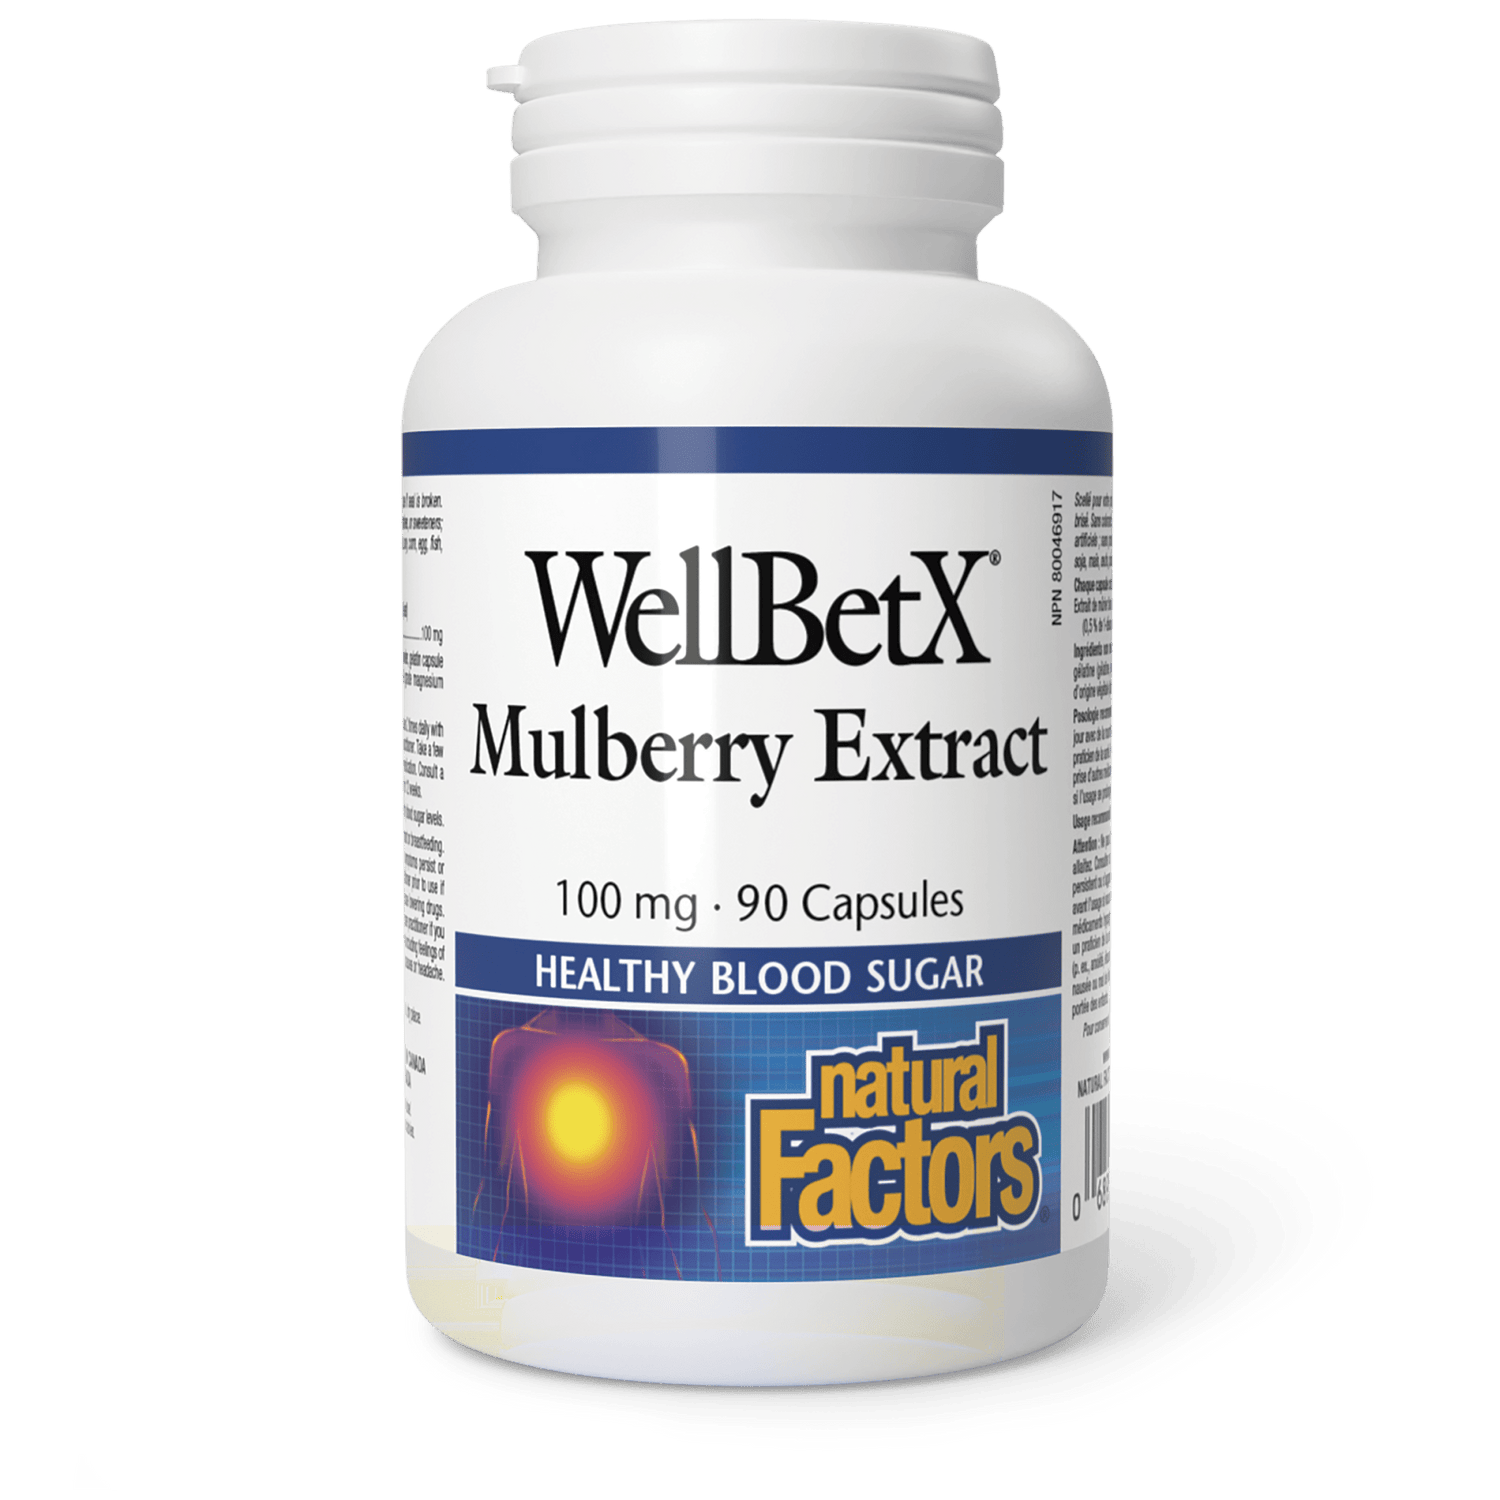 WellBetX Mulberry Extract 100 mg, Natural Factors|v|image|3584